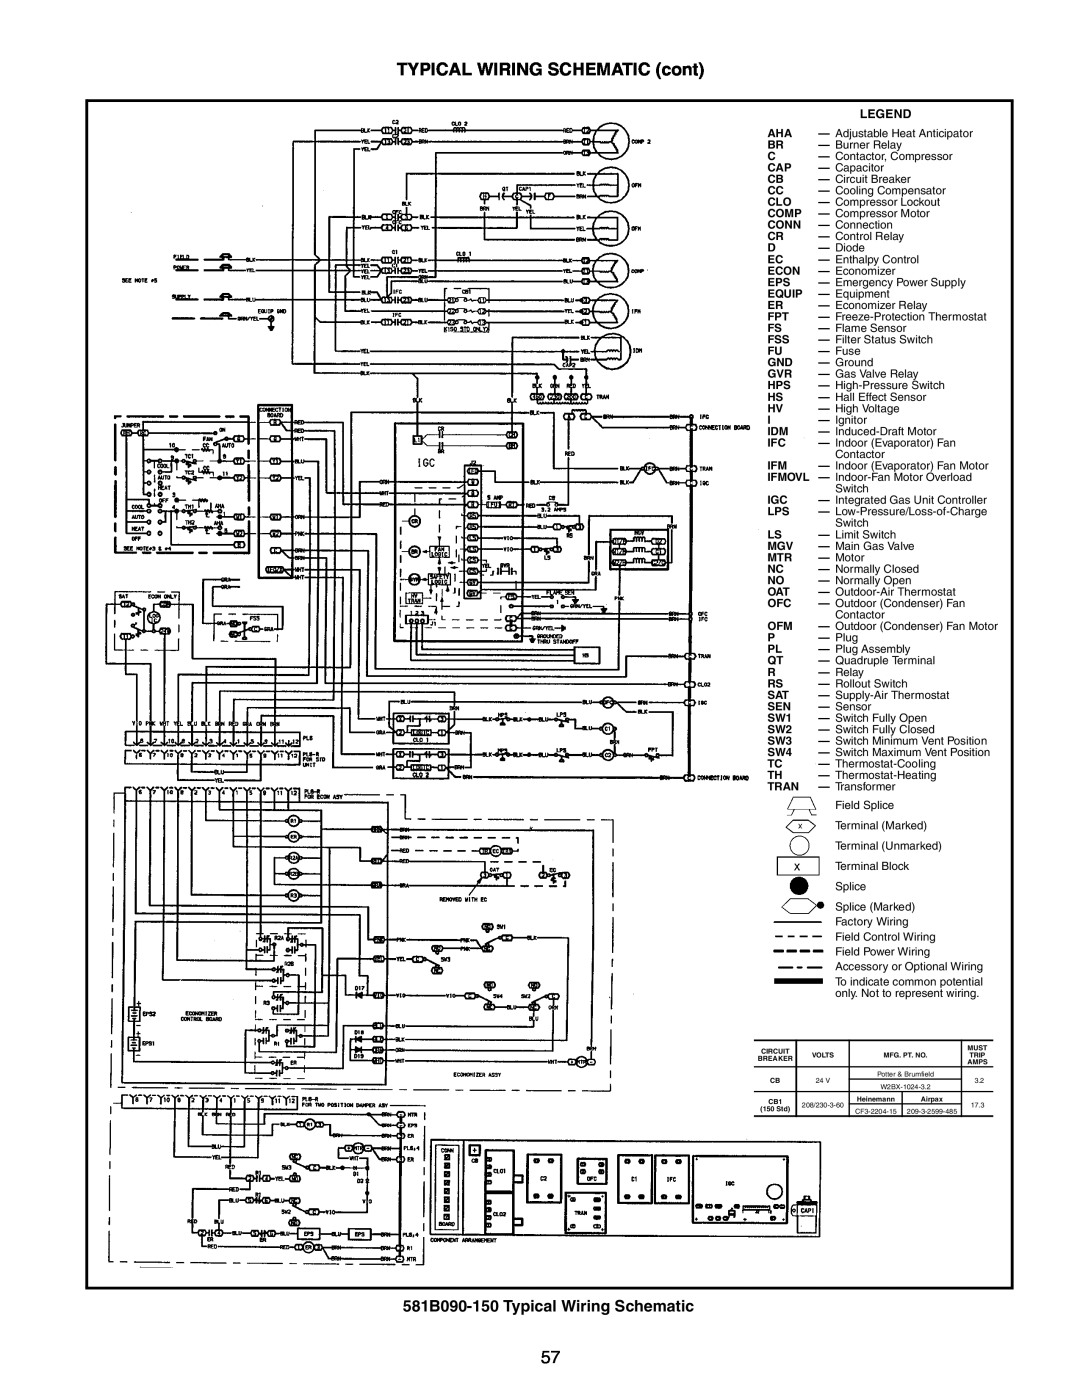 Bryant manual TYPICAL WIRING SCHEMATIC cont, 581B090-150Typical Wiring Schematic 